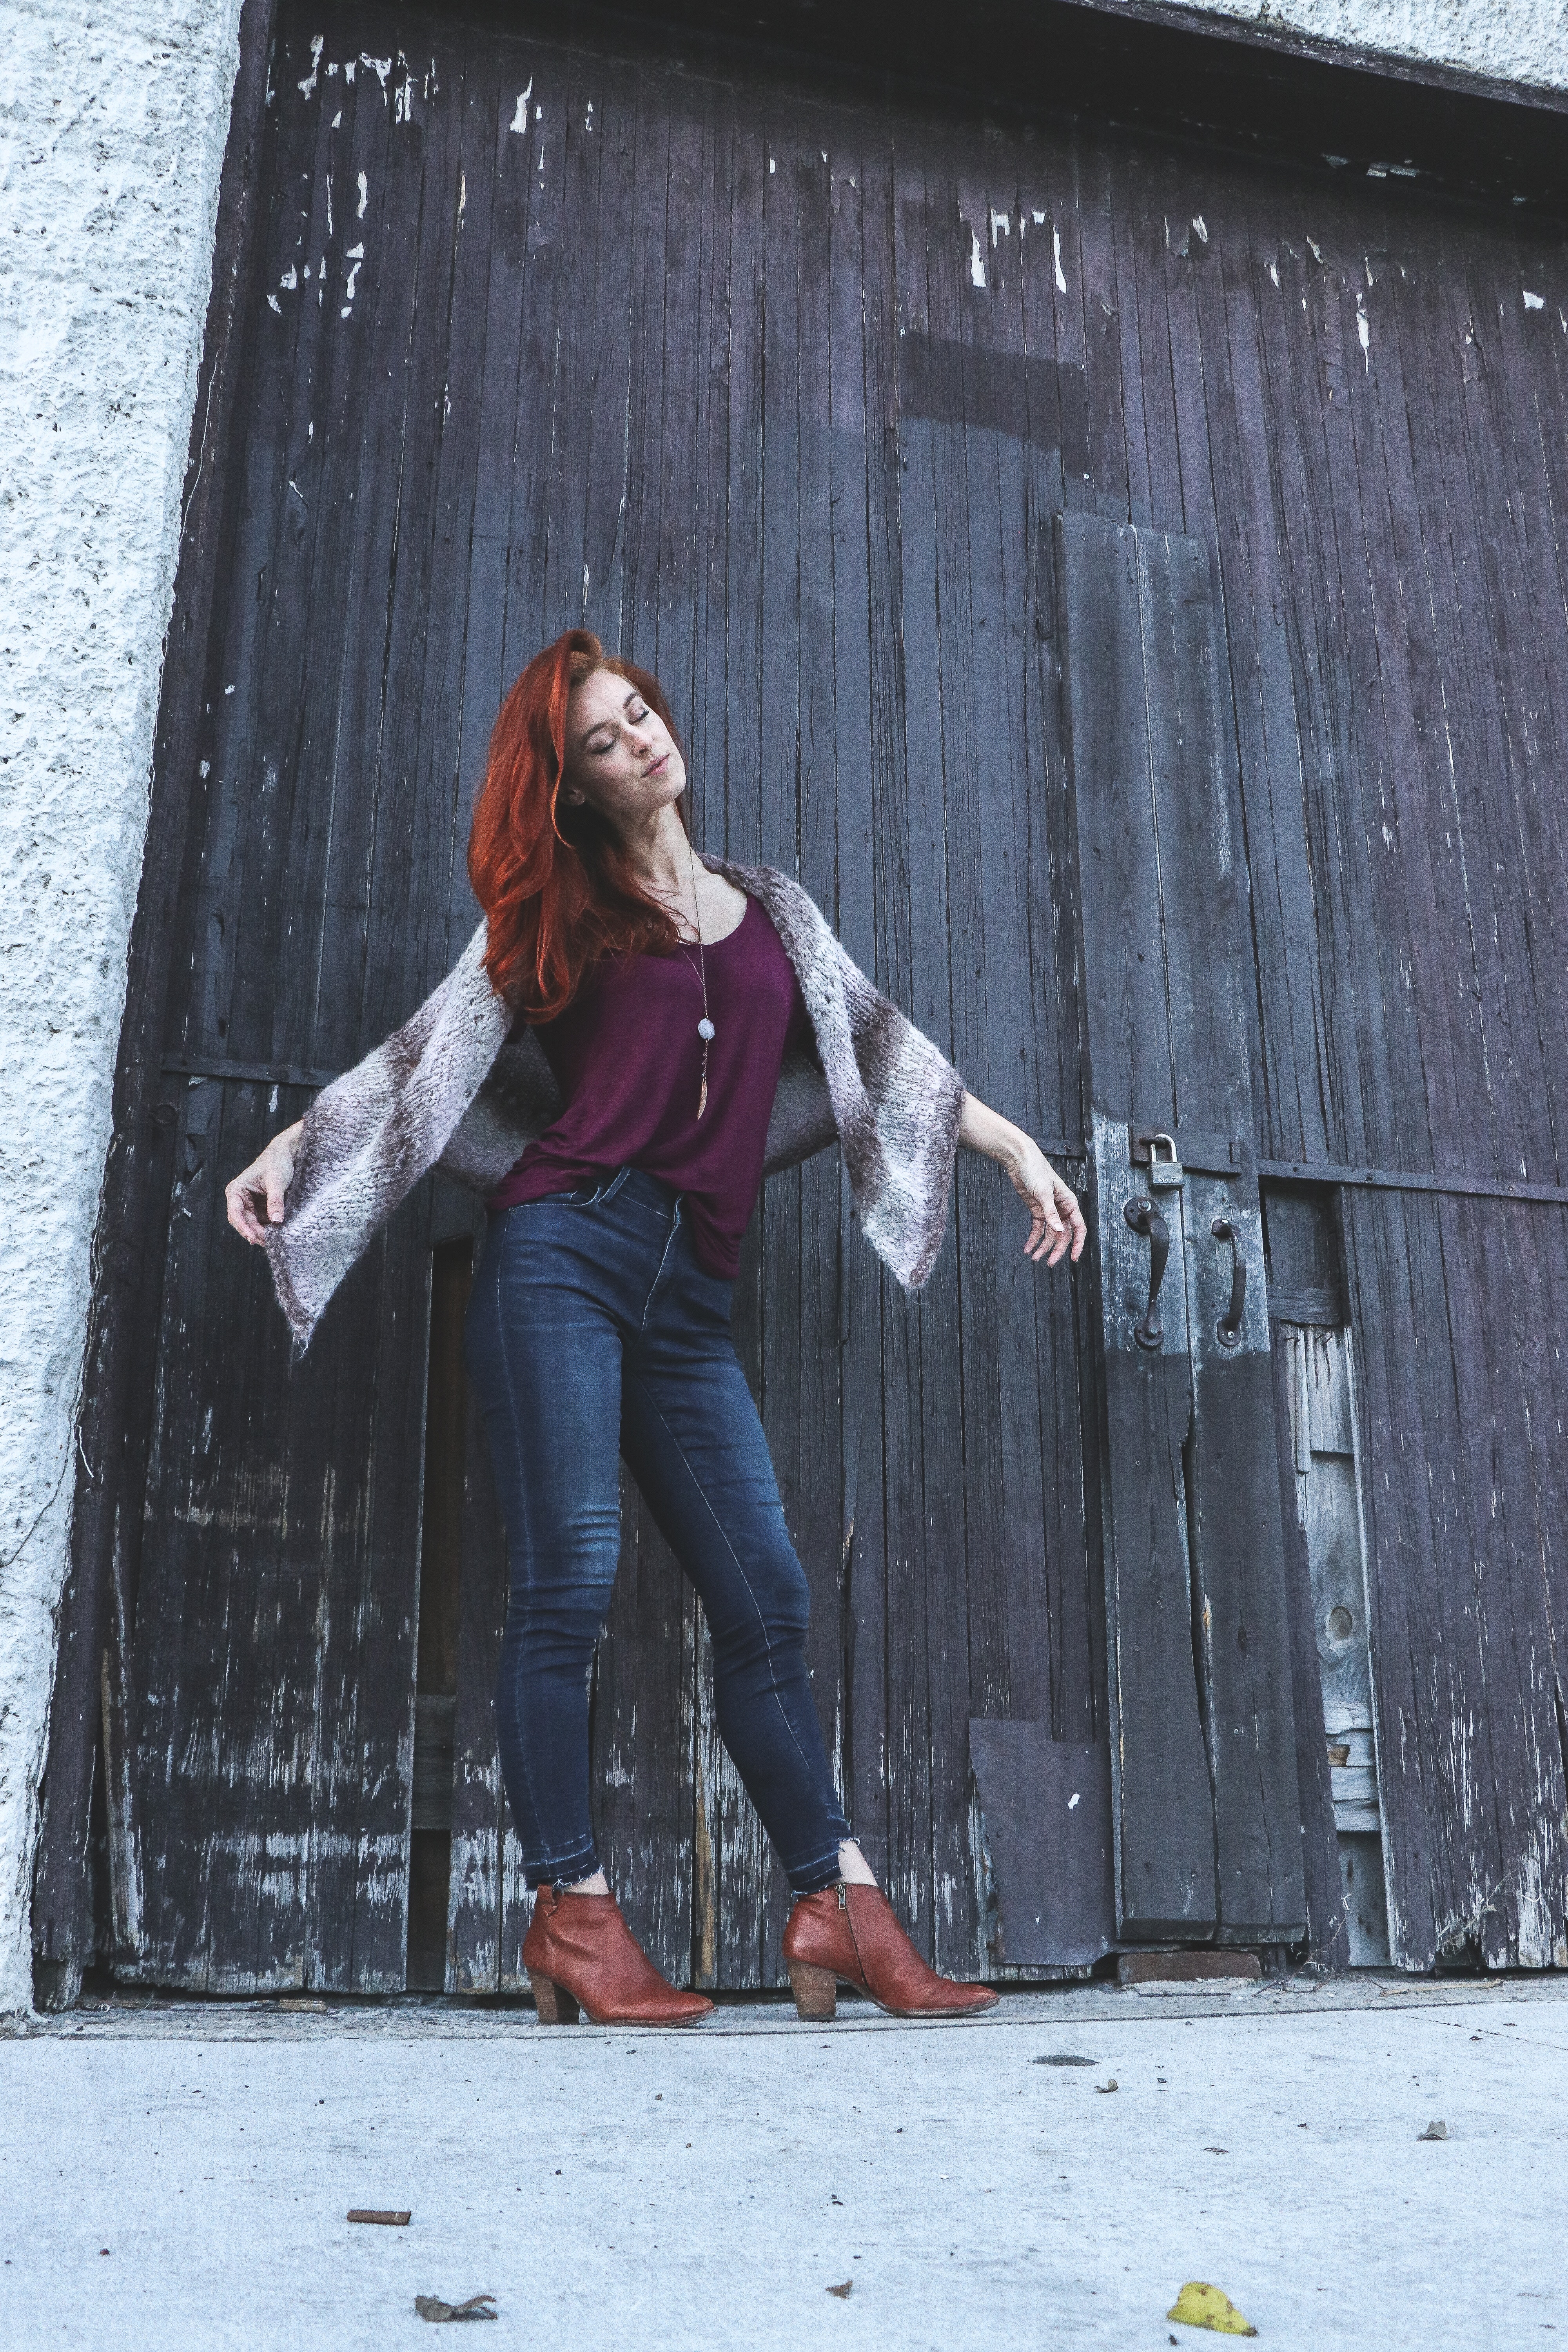 Woman in Red Tank Top With Brown Scarf Standing Near Black Wooden Door Closed, Adult, Red hair, Outdoors, Outfit, HQ Photo